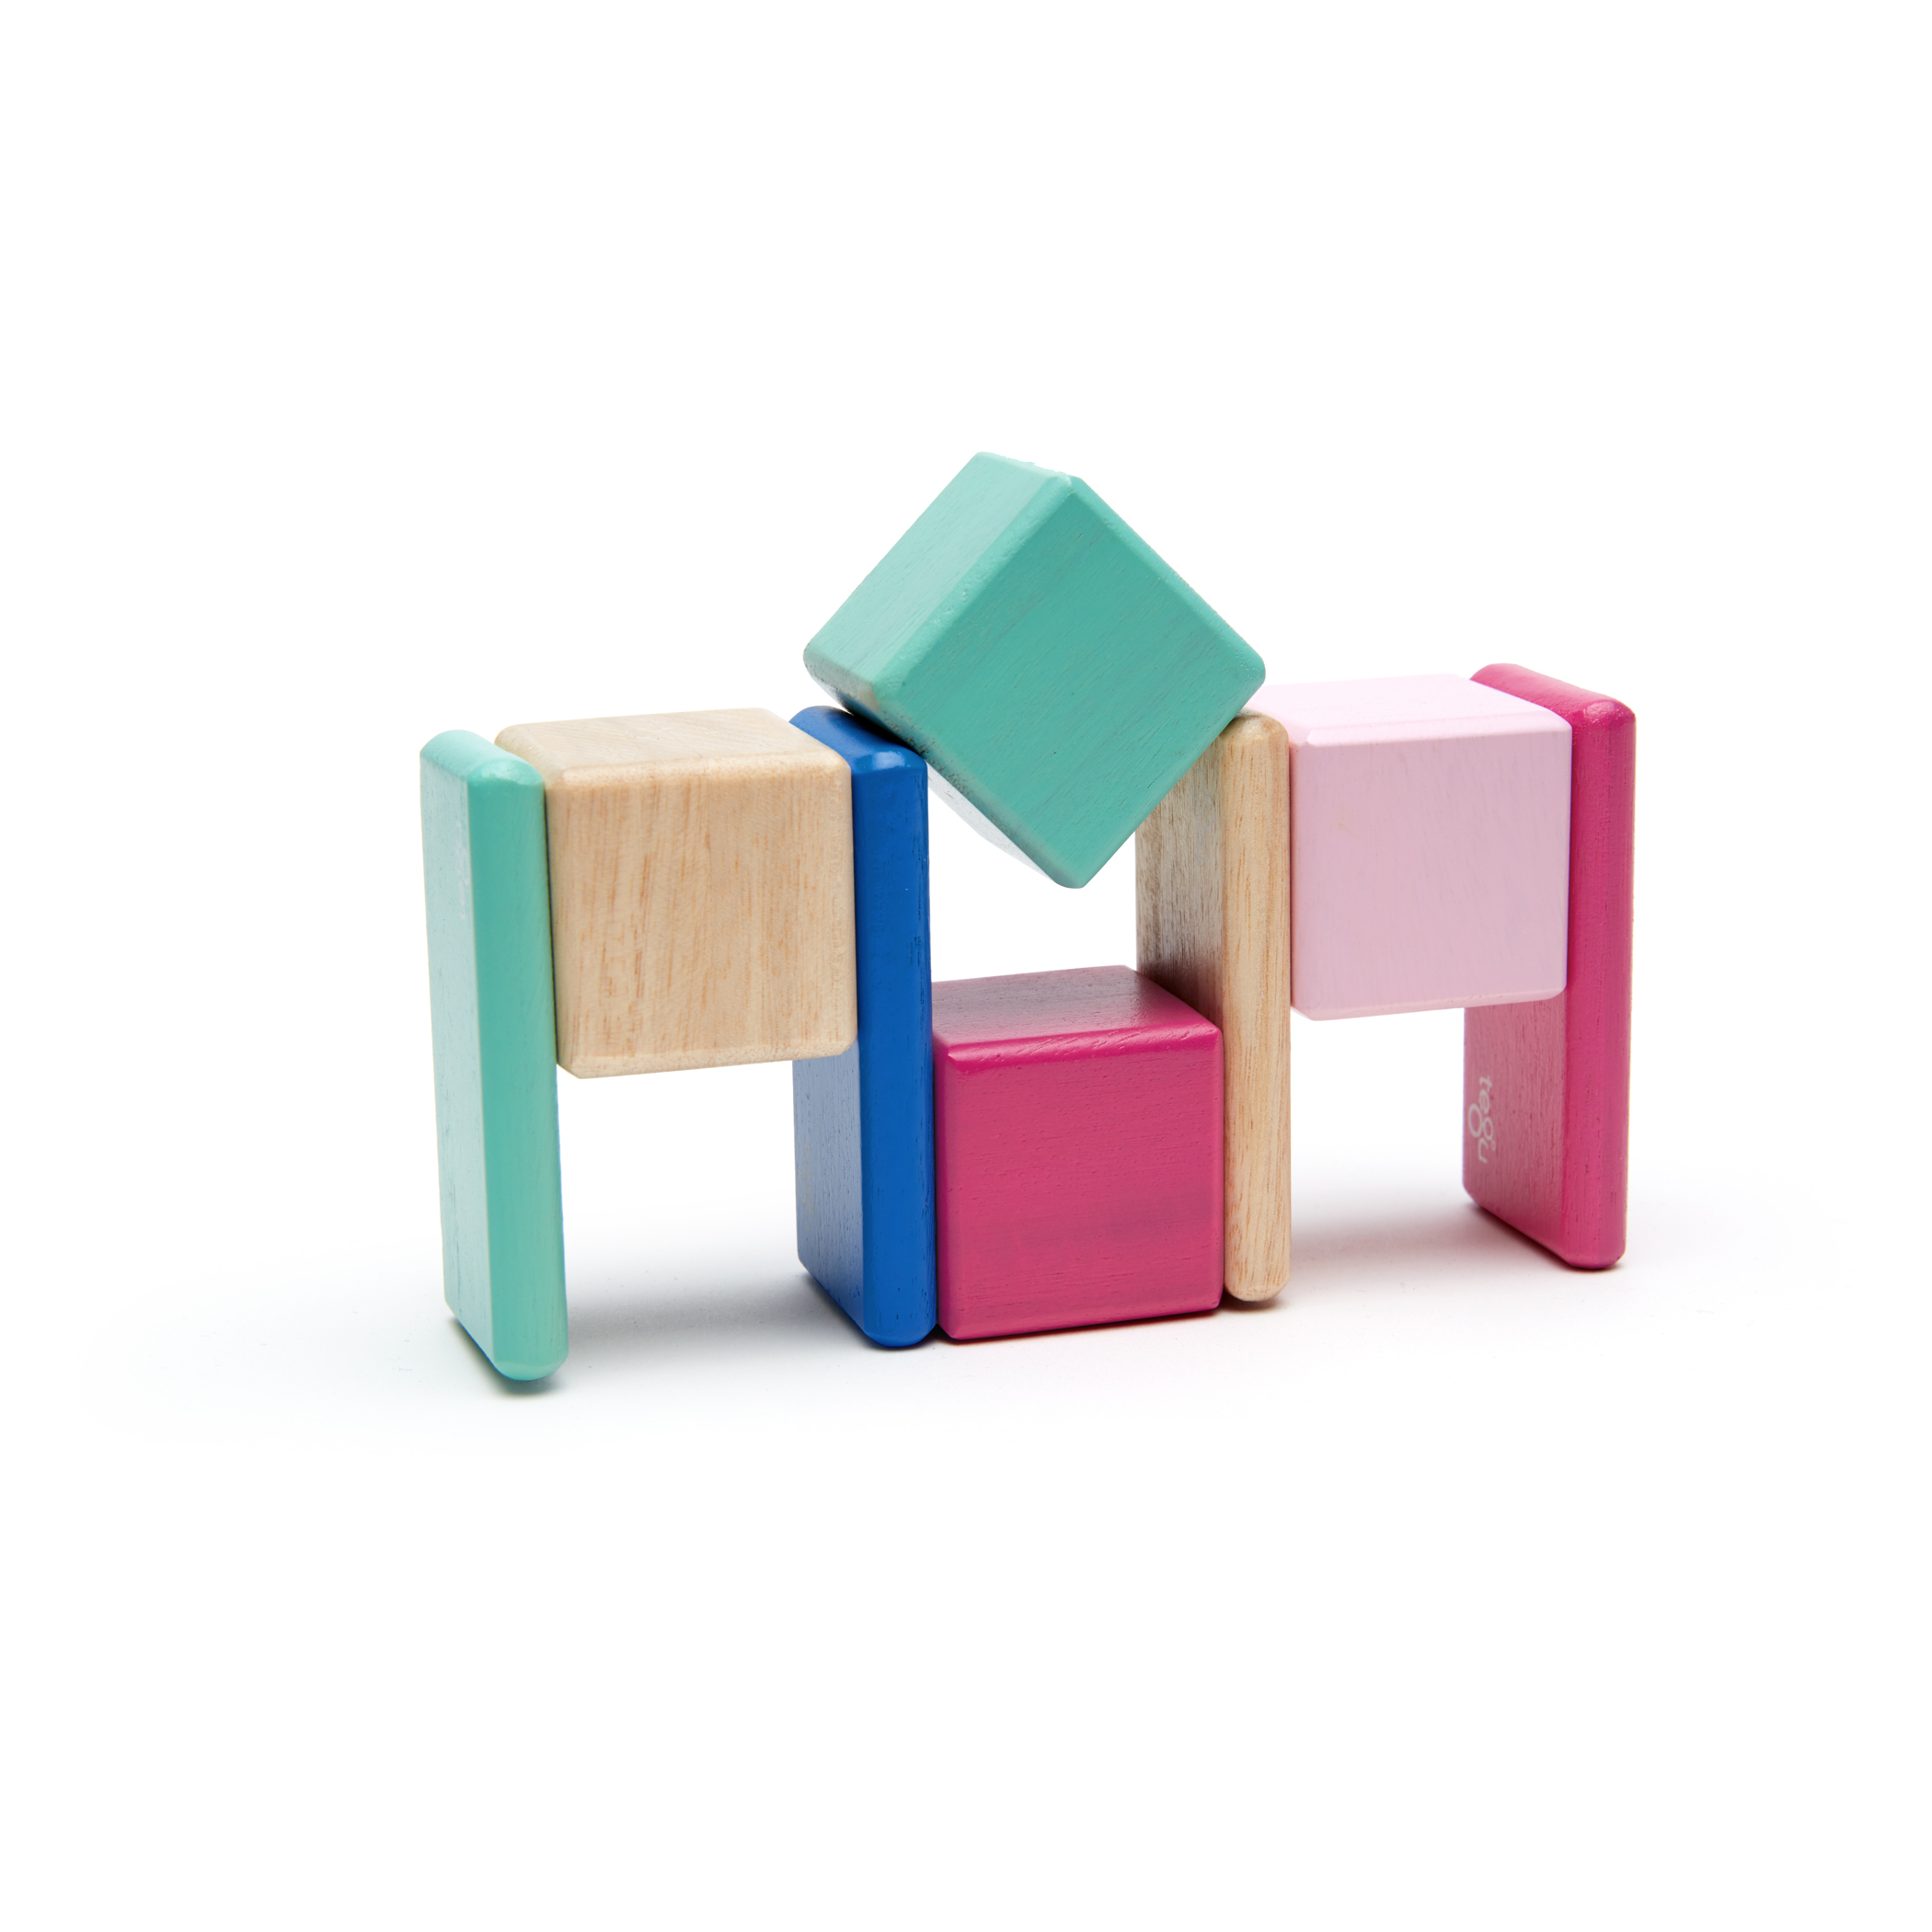 Tegu Magnetic Wooden Blocks, 8-Piece Pocket Pouch, Blossom image number null